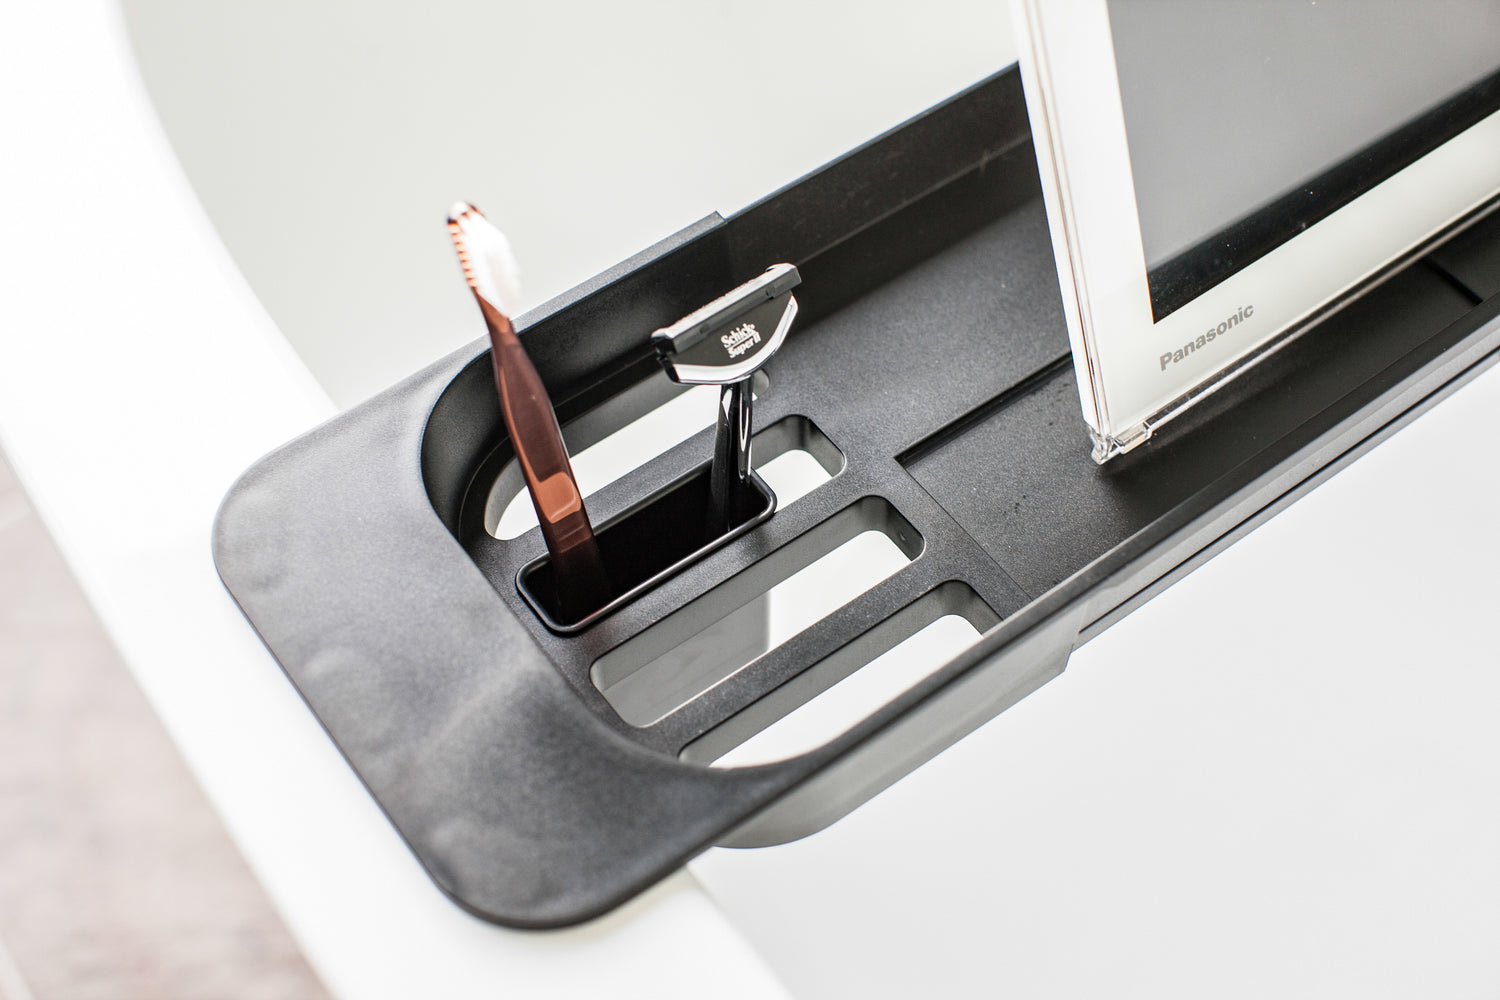 View 11 - Close up aerial view of black Expandable Bathtub Caddy holding razor and toothbrush by Yamazaki Home.